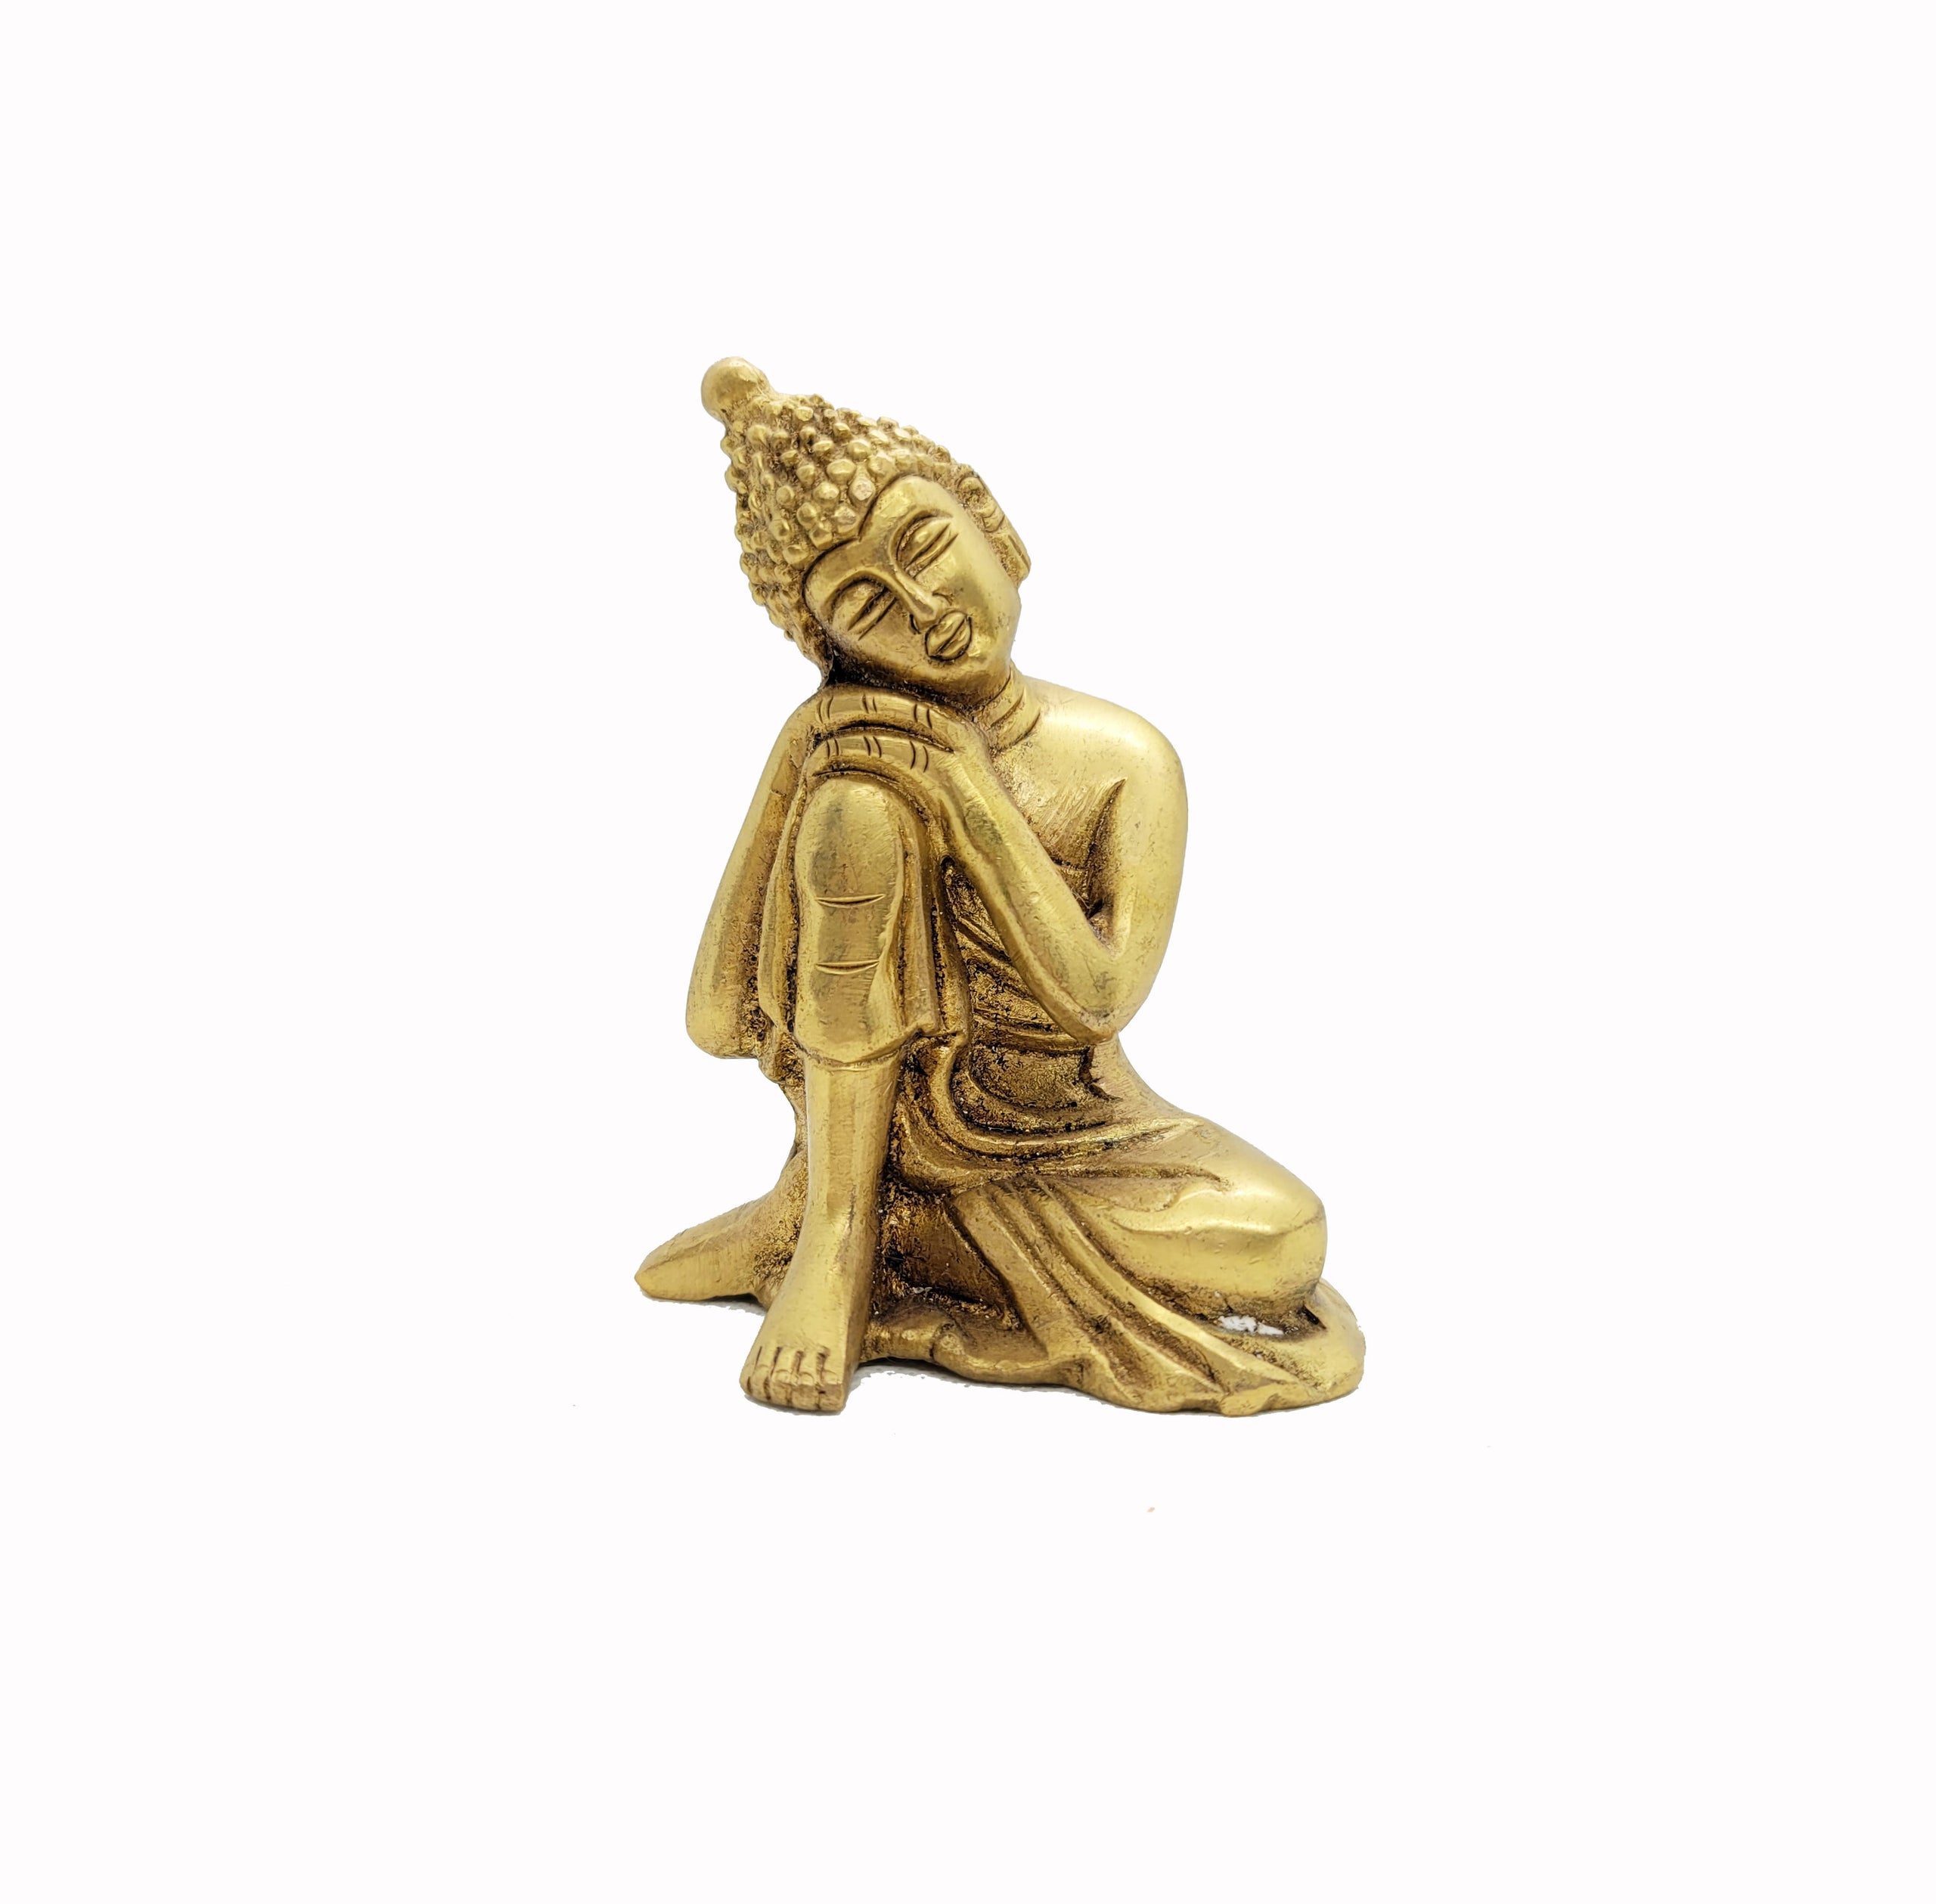 Buy Buddha Idols and Figurines for meditation room in USA and Canada